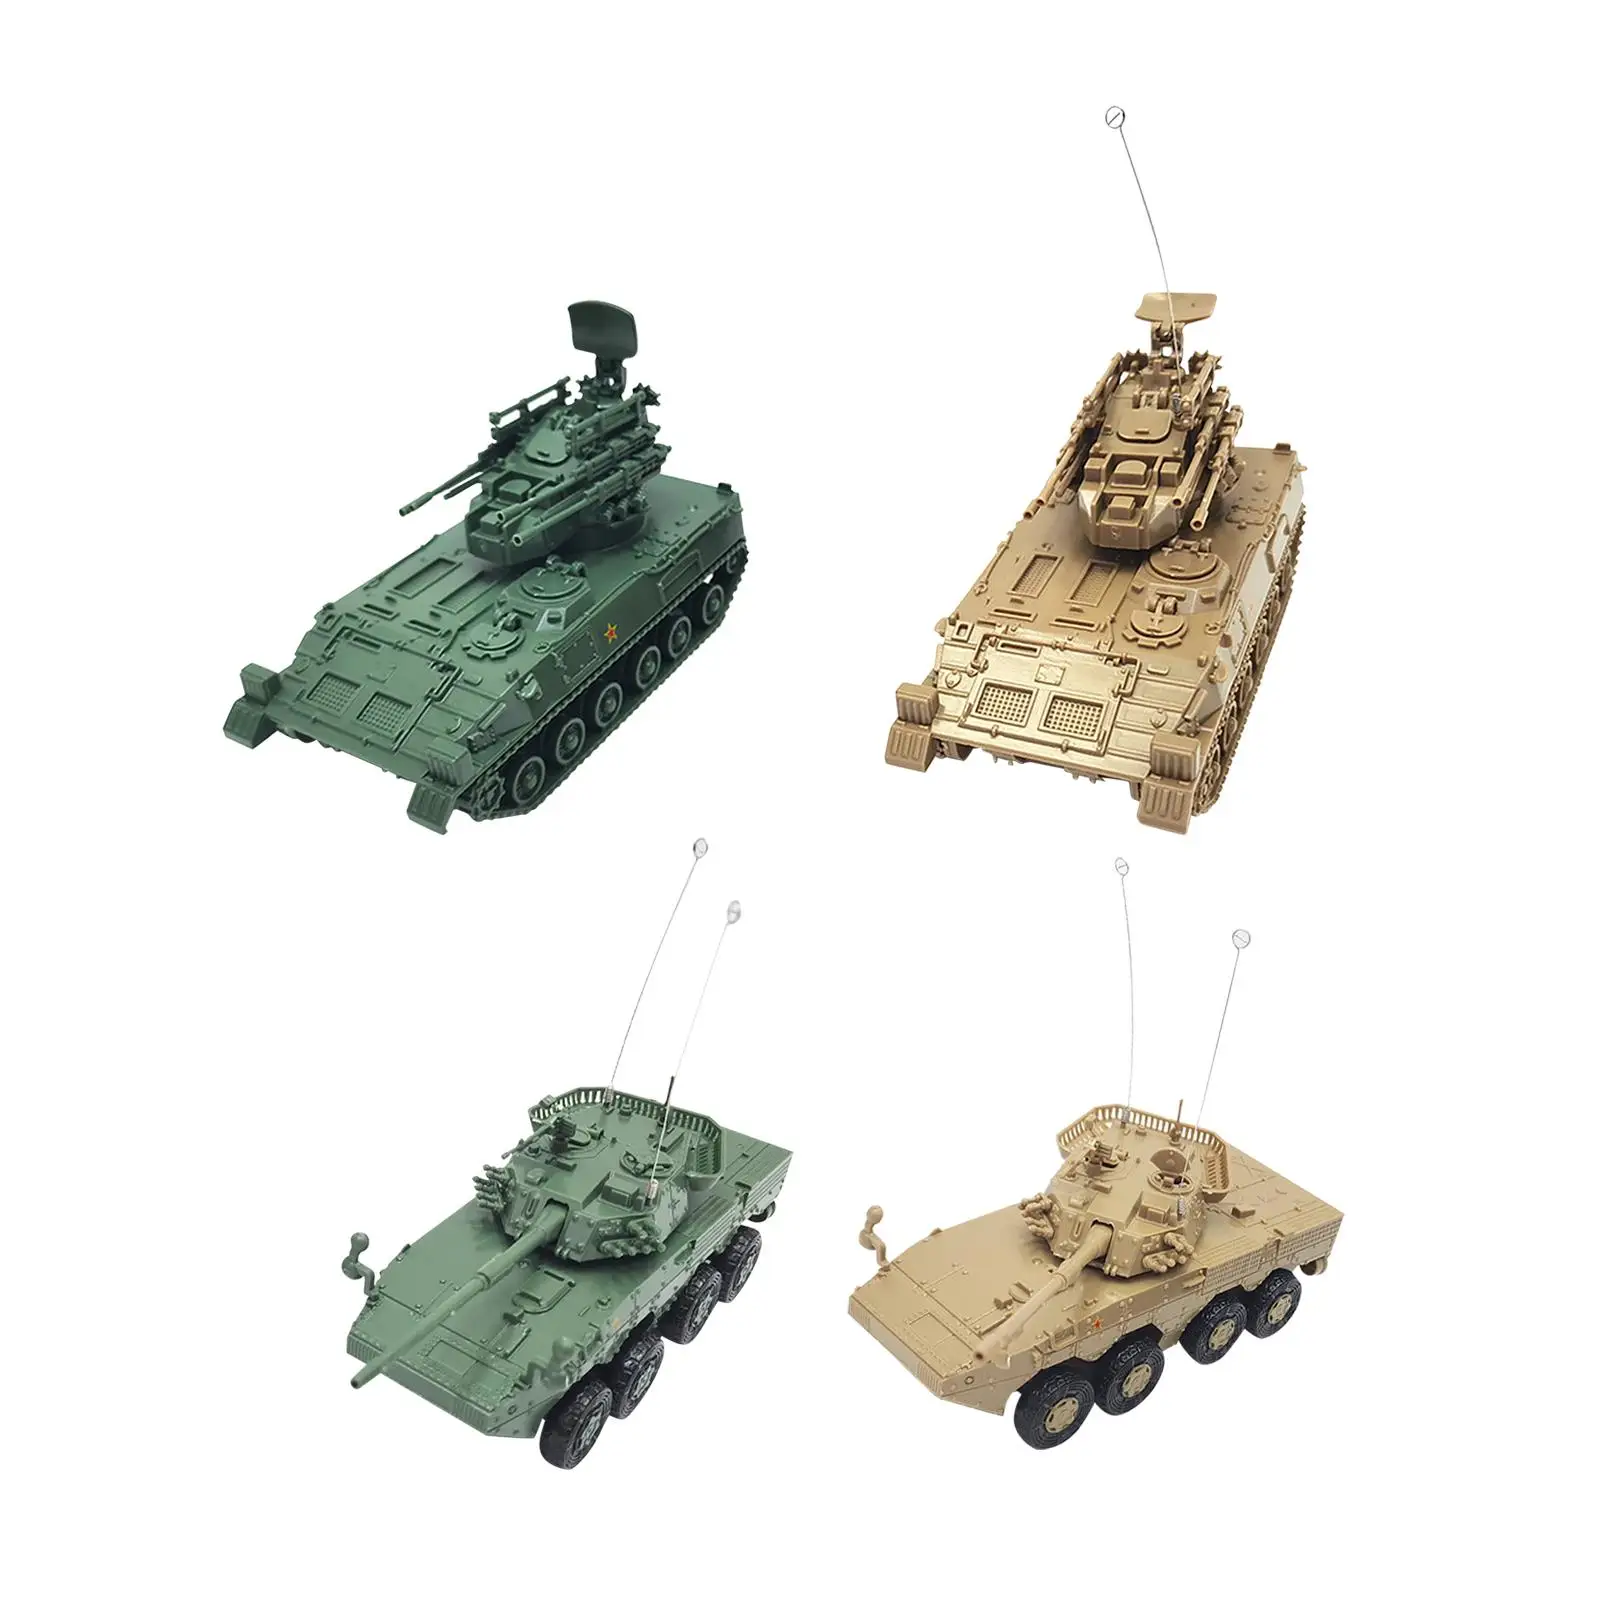 1/72 Armored Tank Model Building Model Reconnaissance Vehicles Armored Vehicles for Gift Keepsake Display Children Collectibles